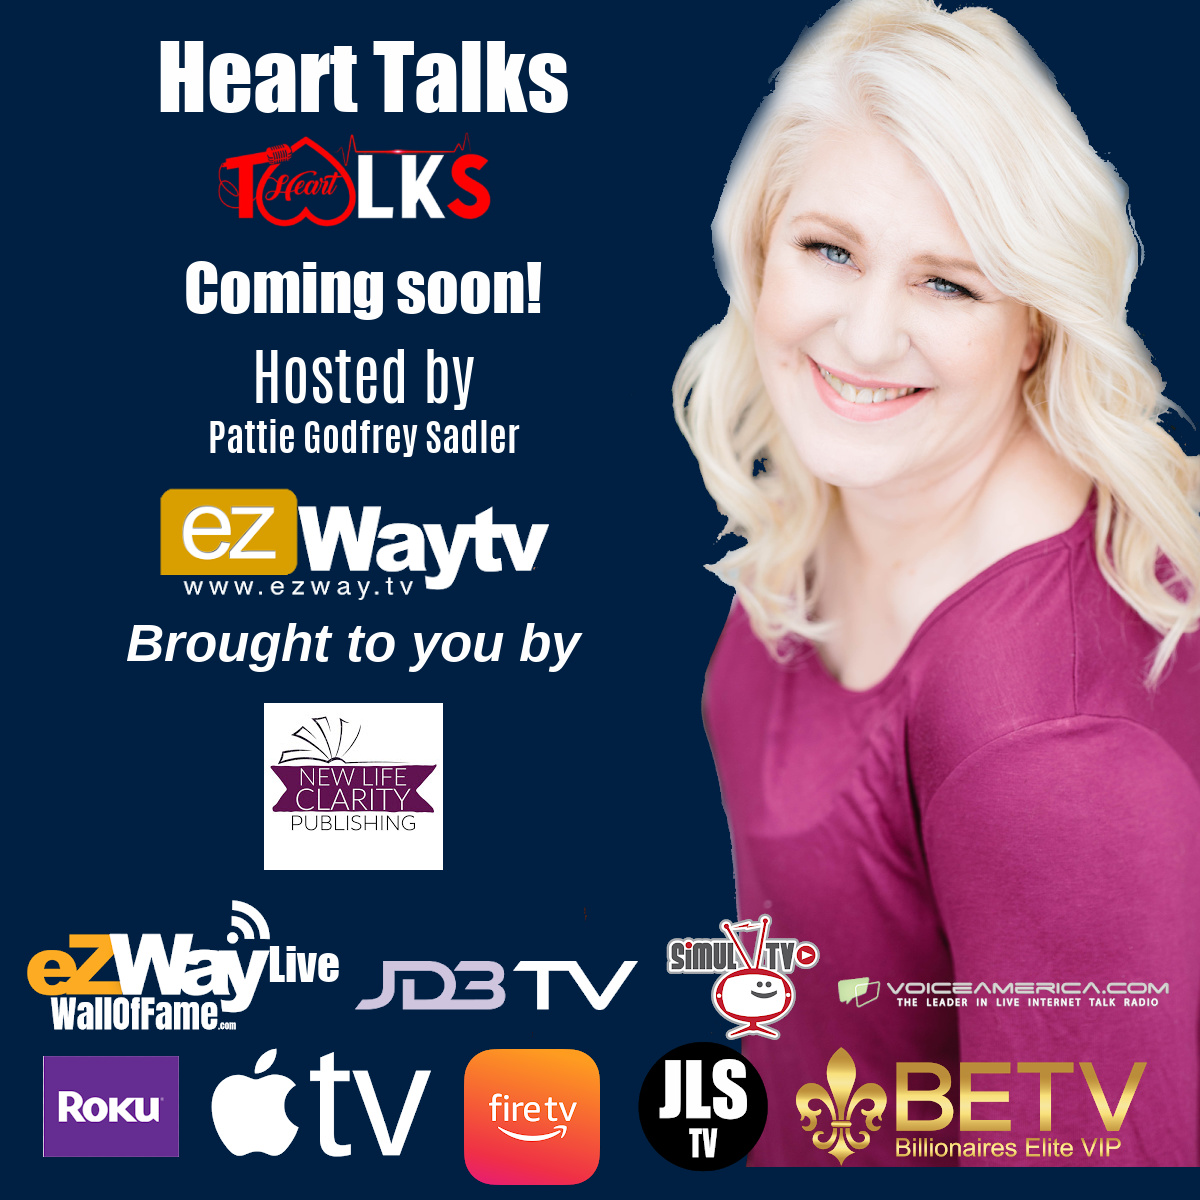 New show Heart Talks with Pattie Sadler coming soon to EZWAYTV